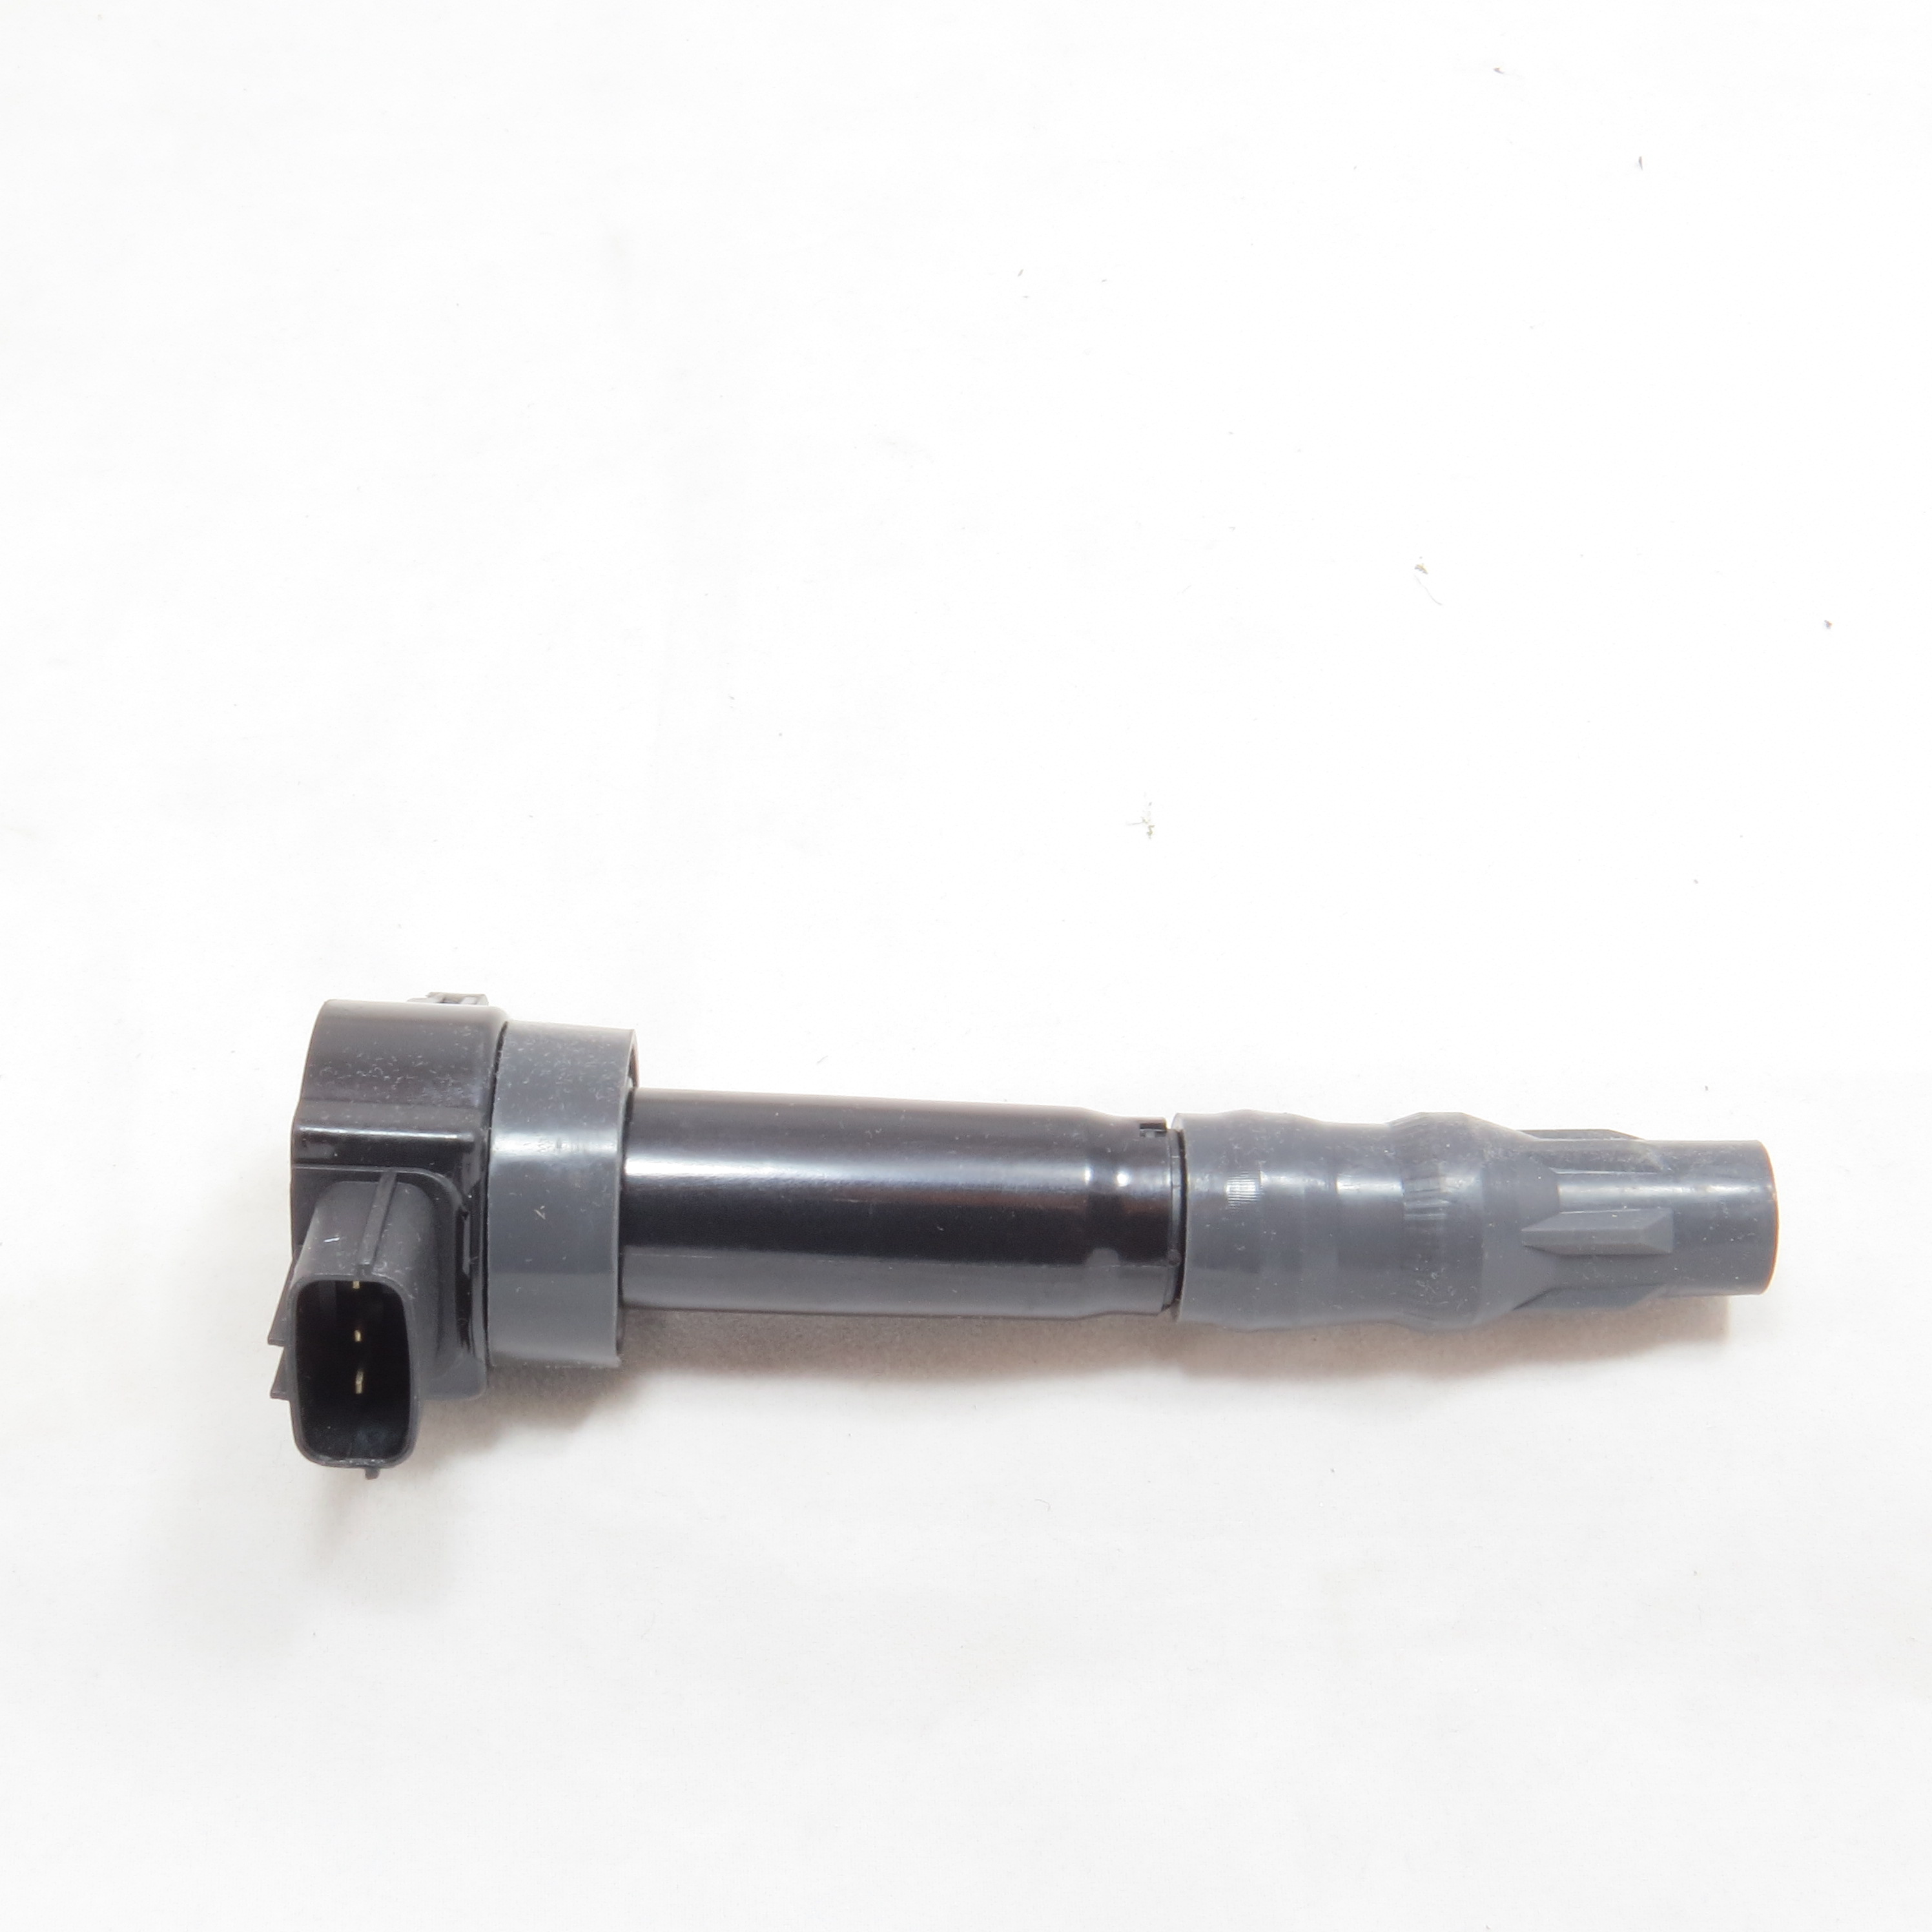 Pictured Here is an Ignition Coil For 2008 Mitsubishi Galant 2.4l